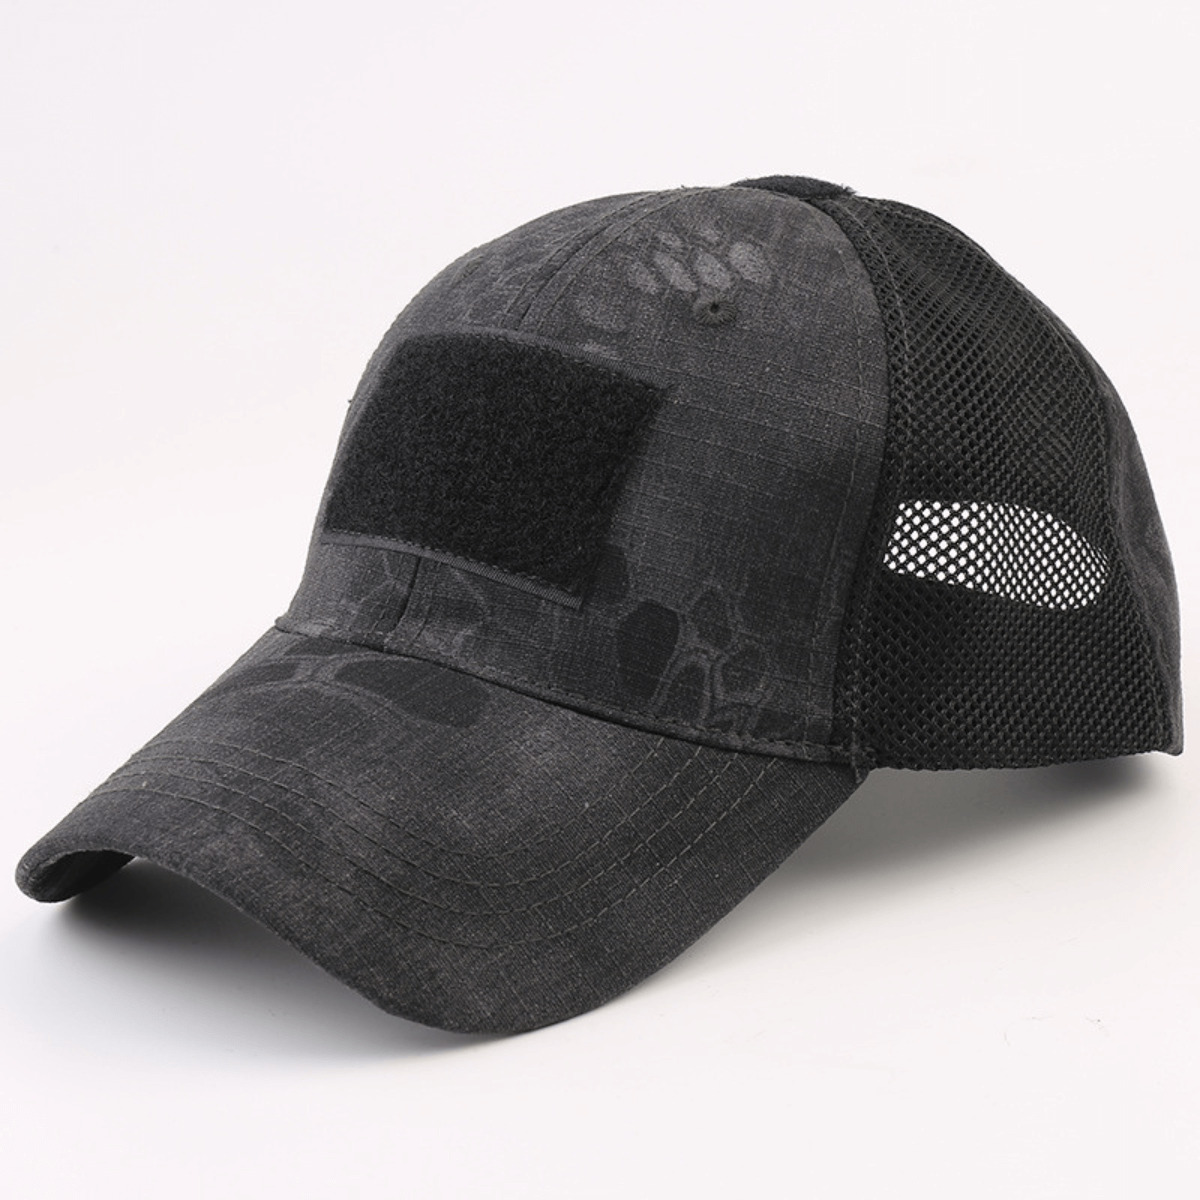 Tactical-Style Patch Hat With Adjustable Strap - Python